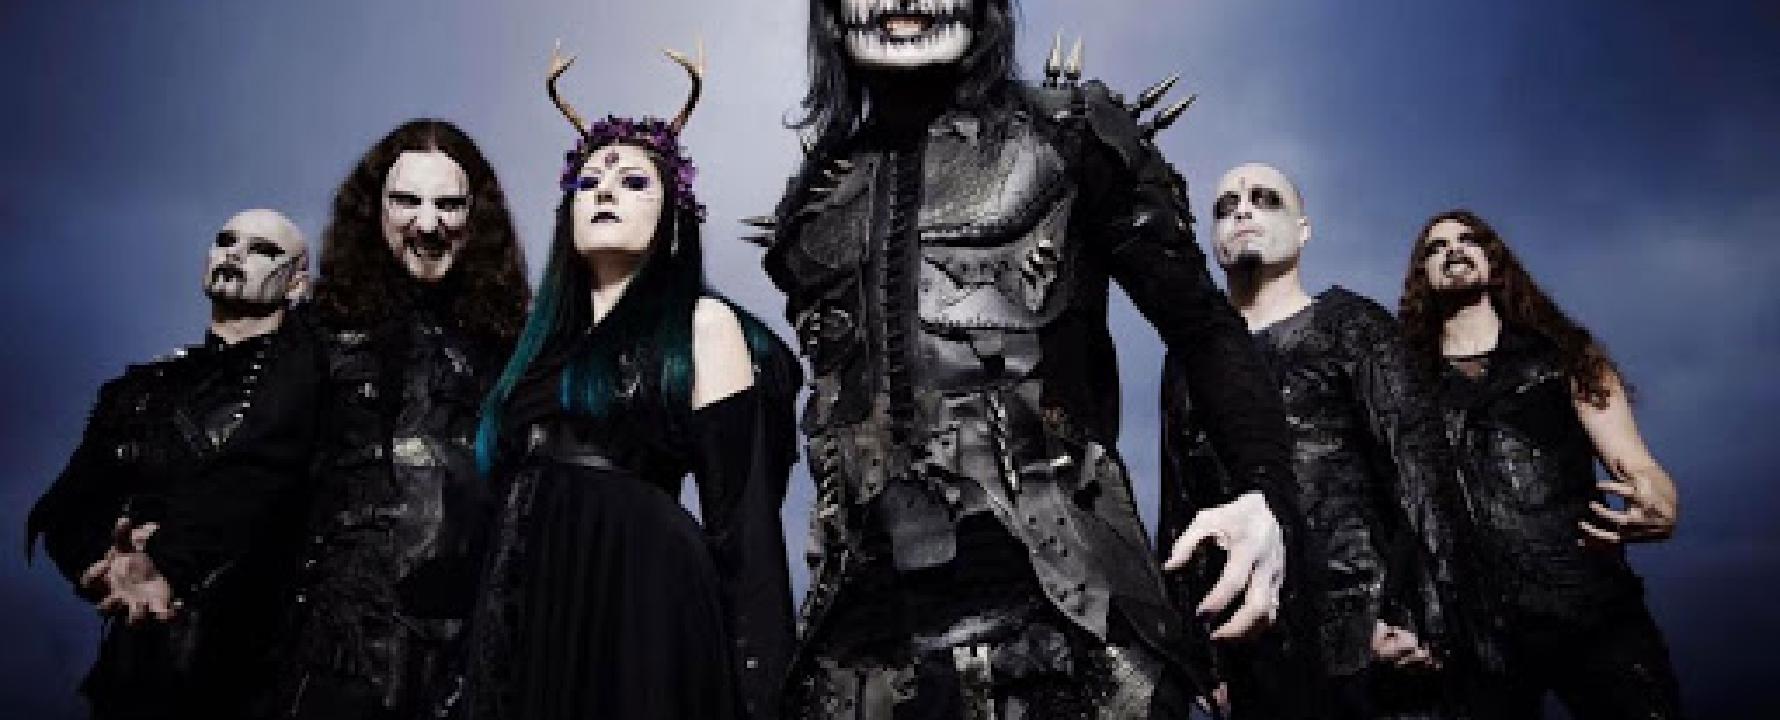 Promotional photograph of Cradle of Filth.